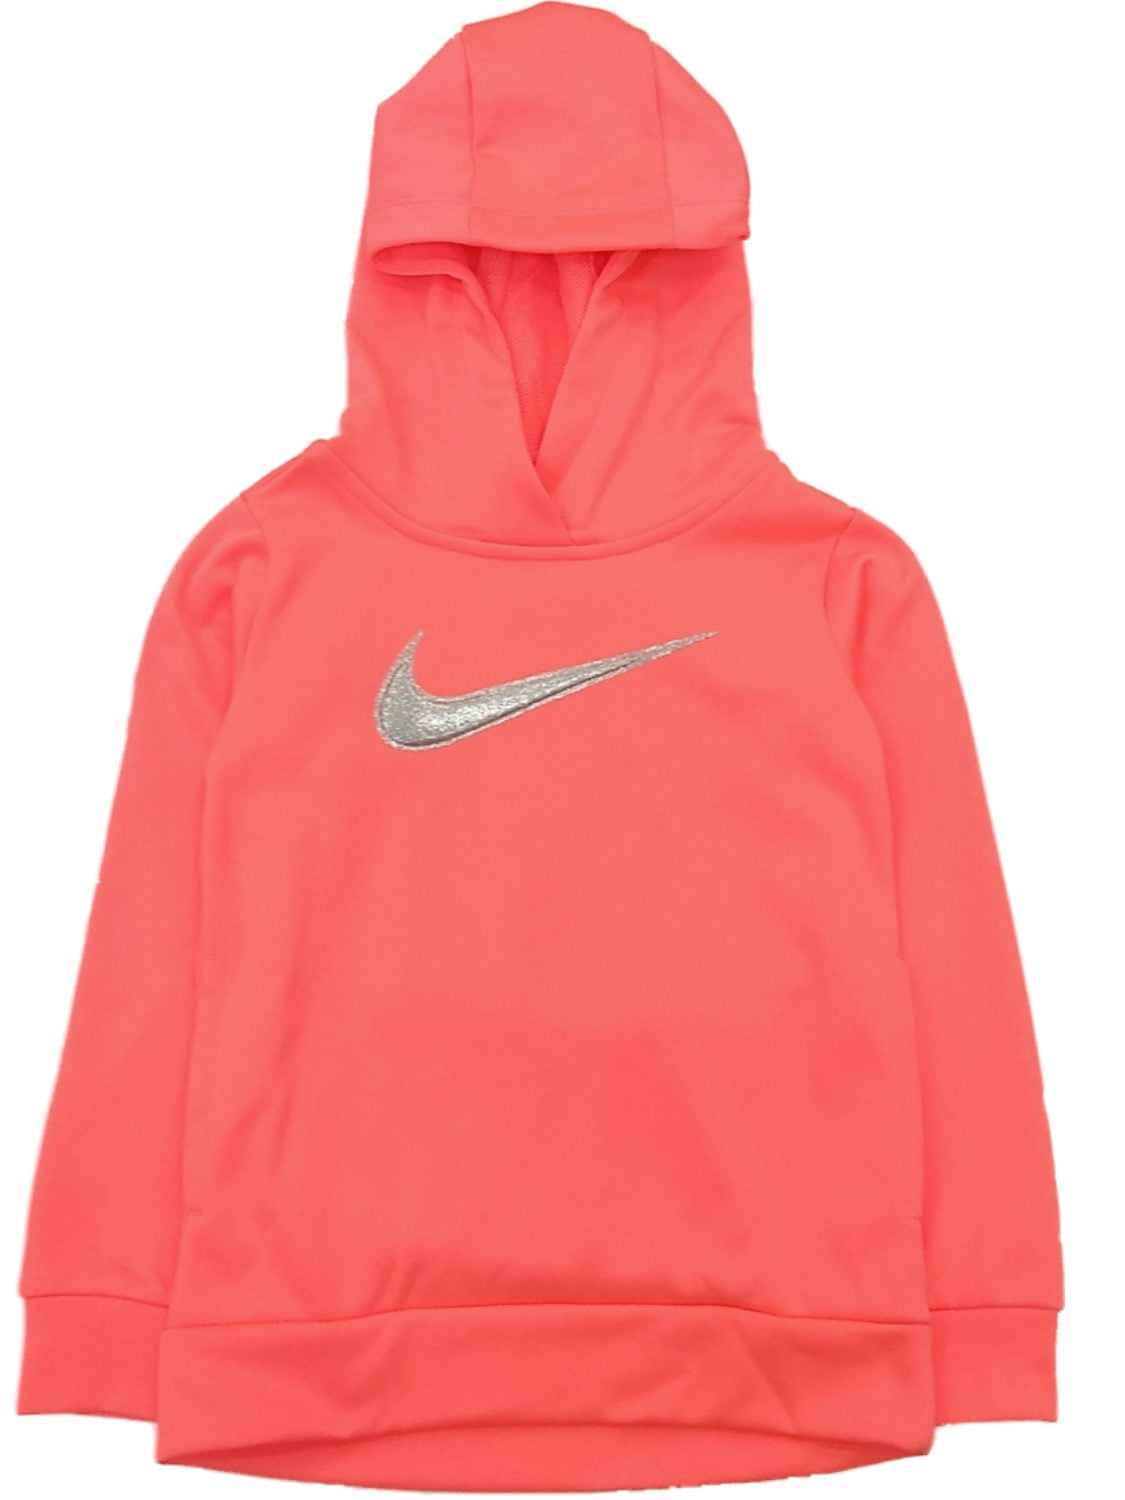 Nike Womens Sweatshirt Small Therma Fit Pullover Hoodie Pink/Red Check Logo